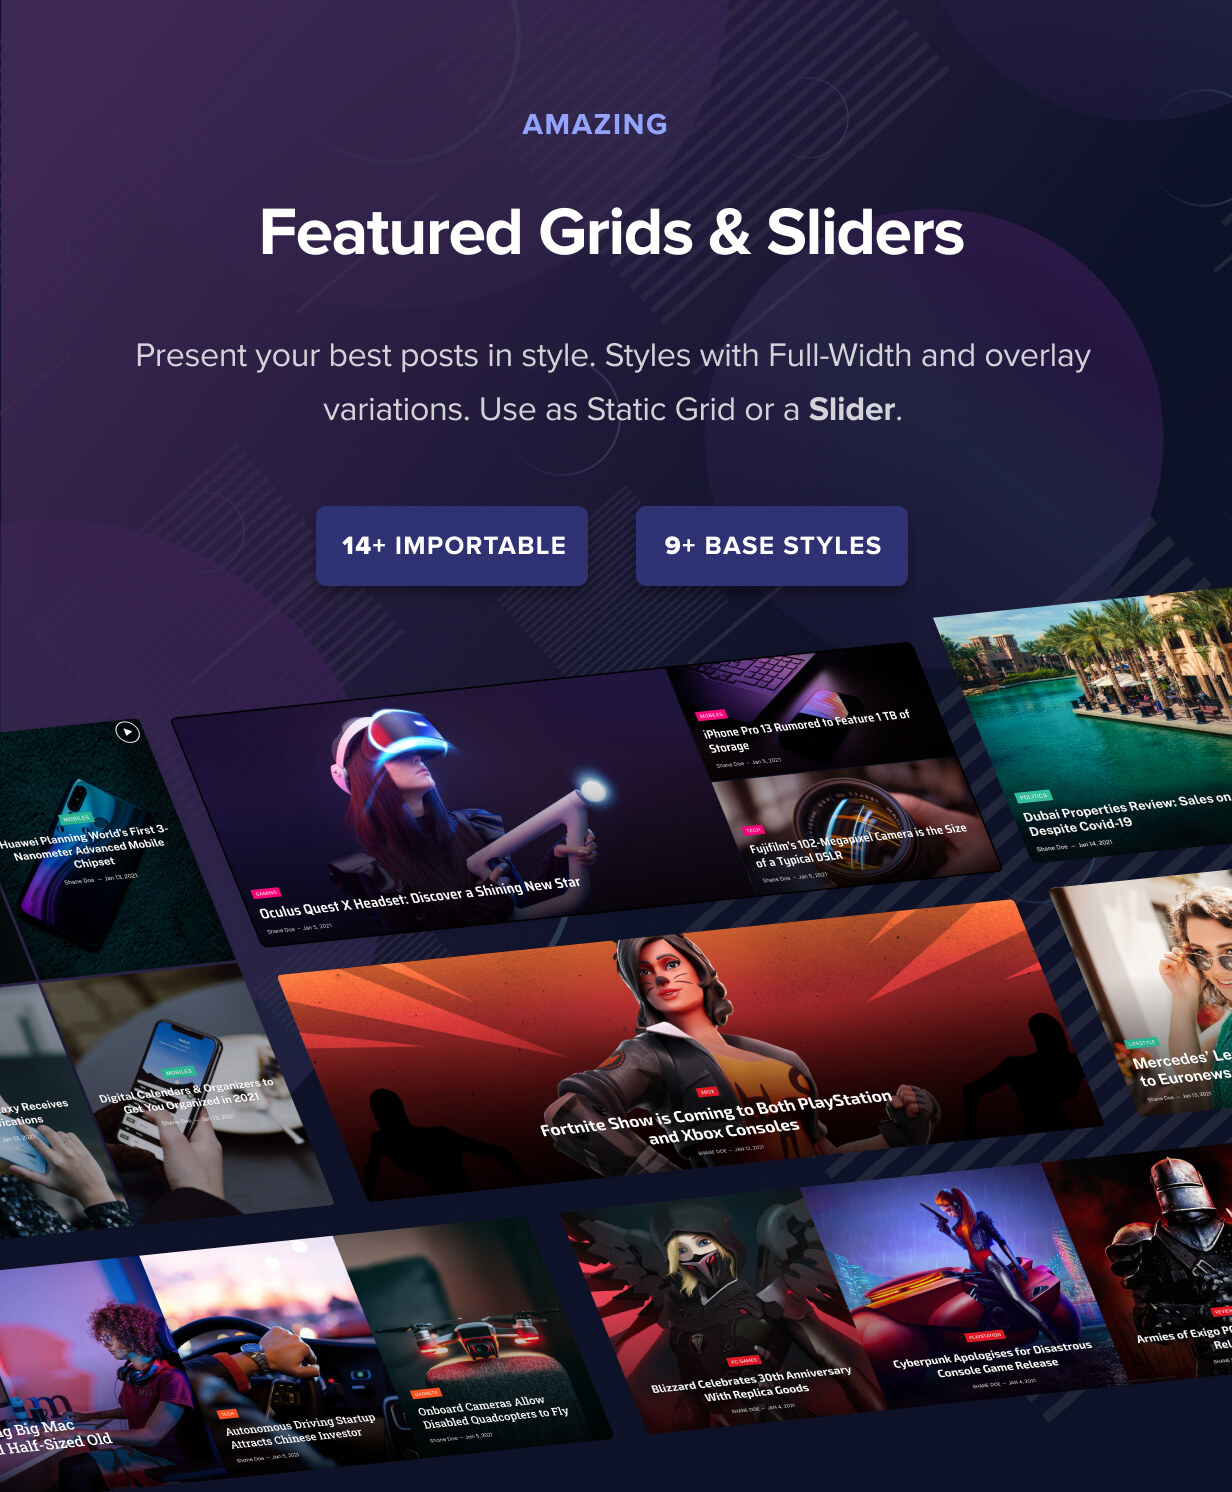 Featured Grids & Sliders